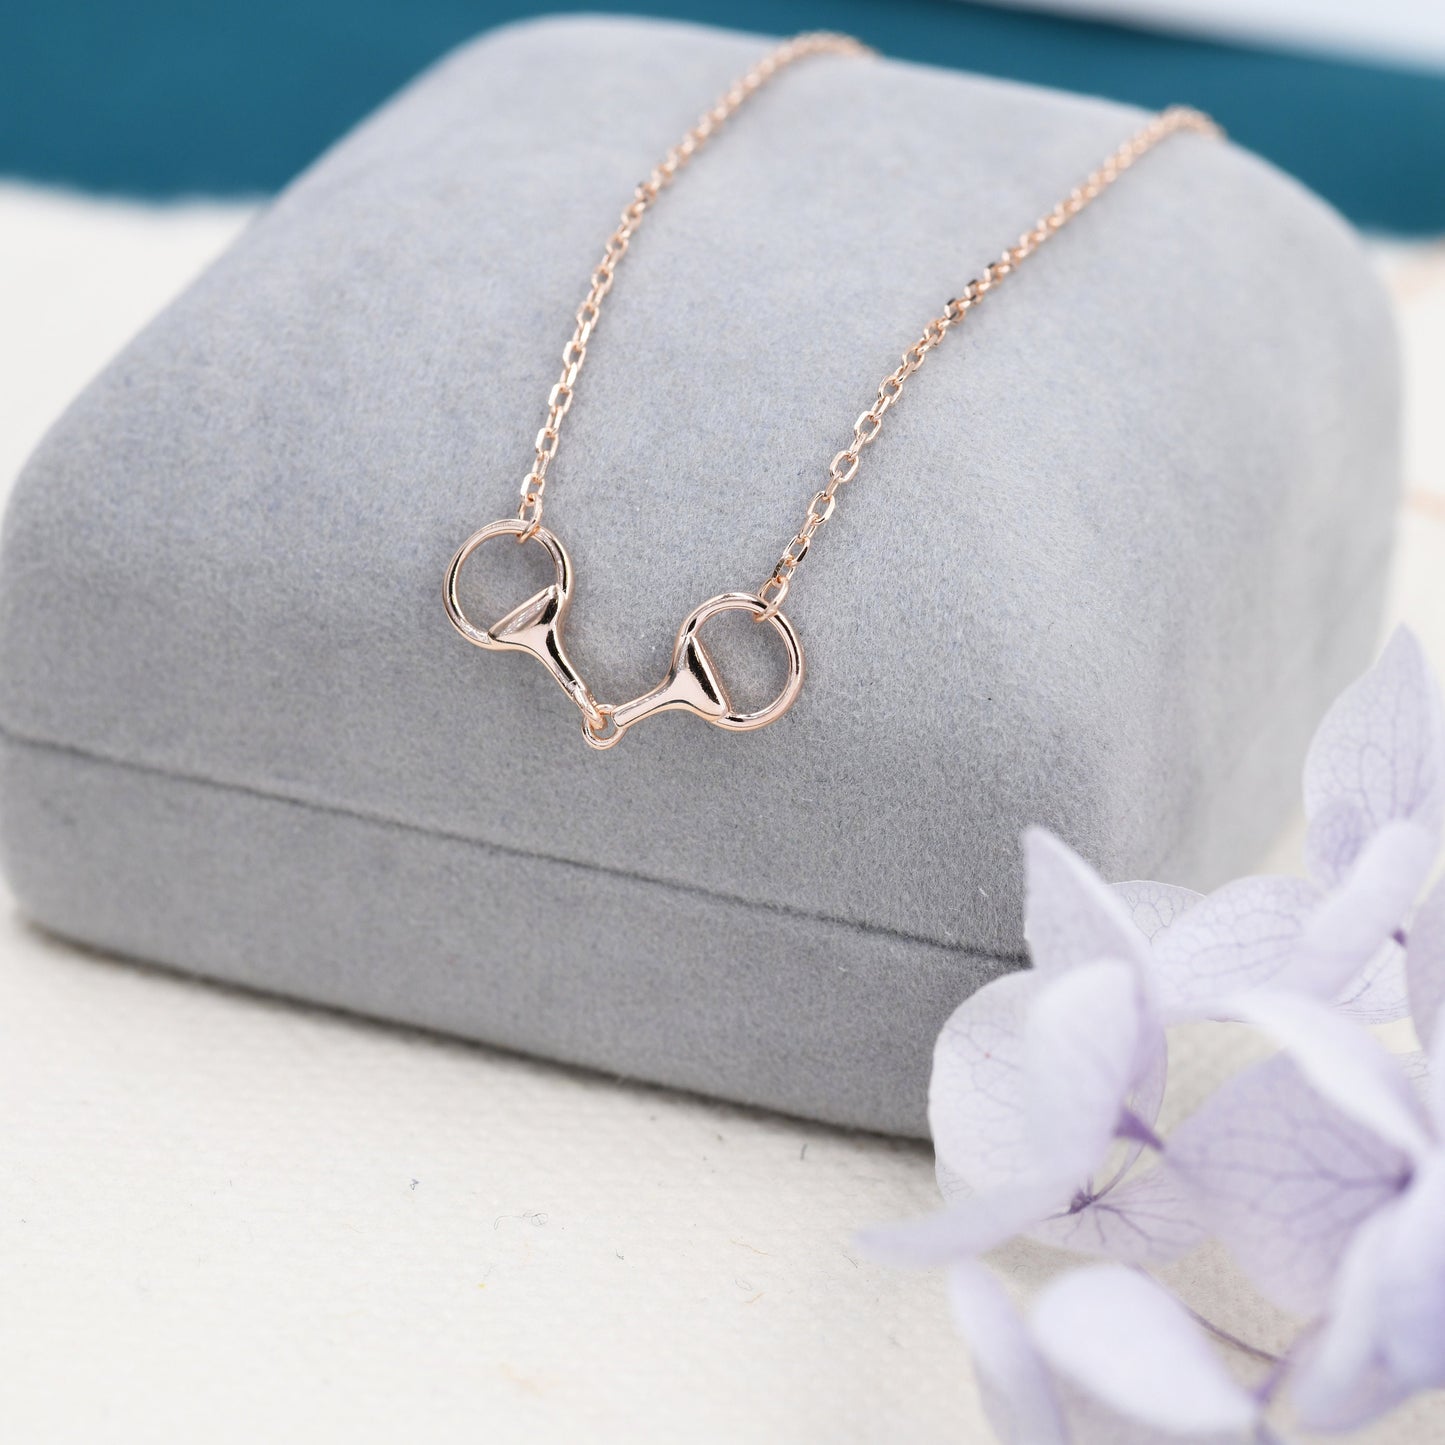 Snaffle Bit Necklace in Sterling Silver, Silver or Gold, Horse Necklace, Horse Charm, Horse Gift, Horse Jewellery